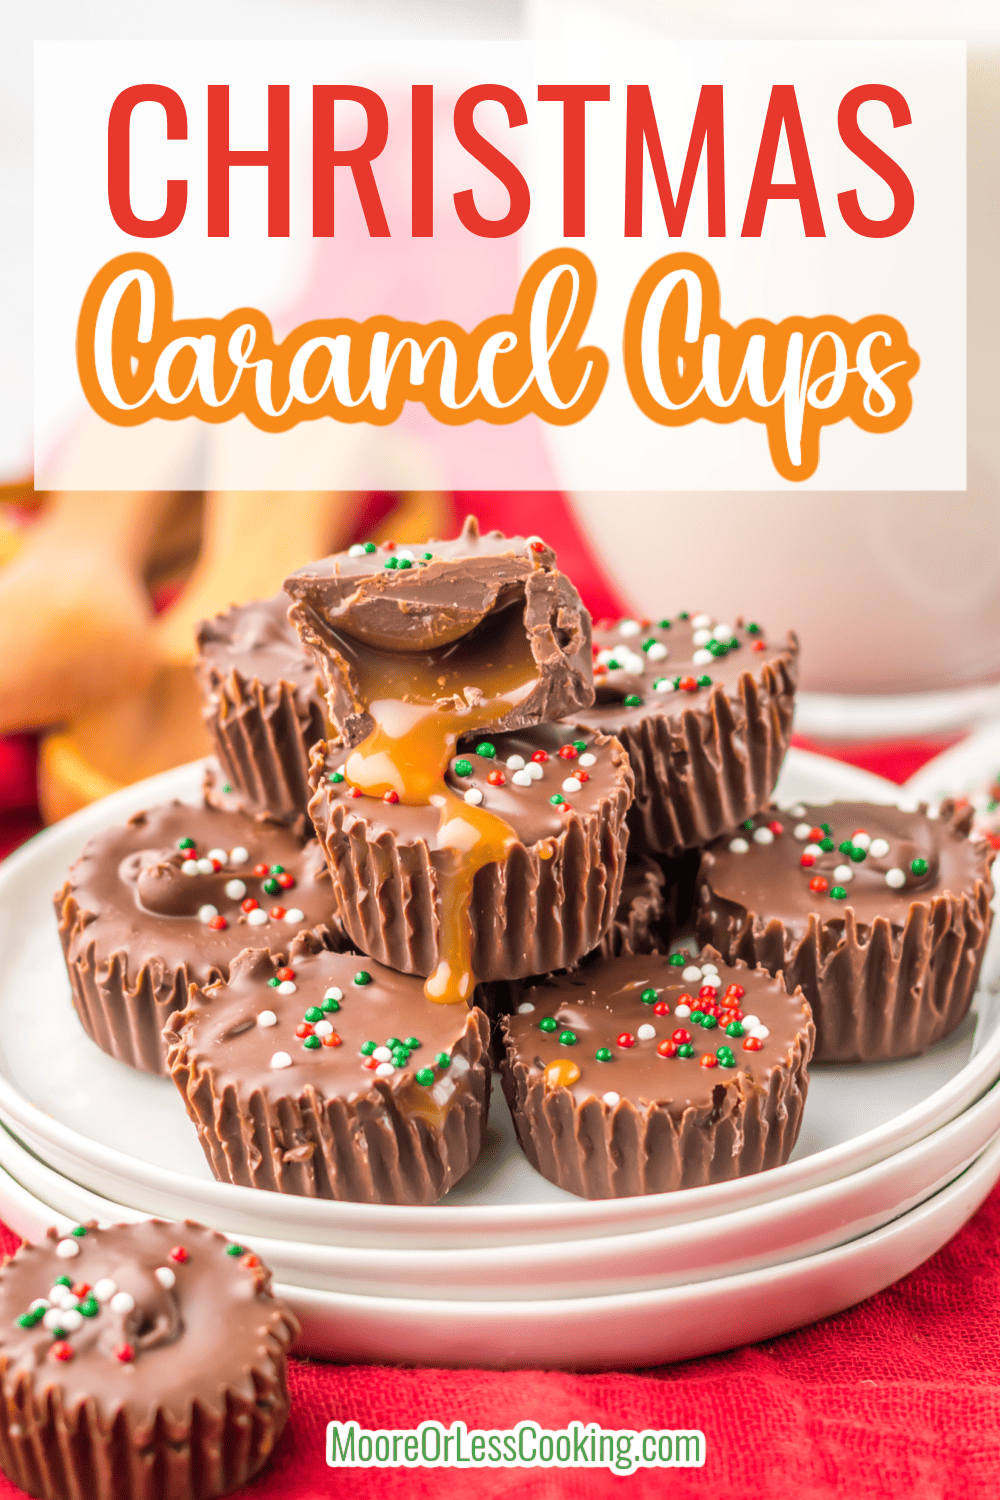 The irresistible duo of chocolate and caramel is combined into these festive candy cups that are perfect for the holidays and beyond. These Christmas Caramel Cups are a no-bake 3 ingredient candy that's super simple to make. You'll taste the scrumptiousness with that first bite that oozes caramel deliciousness from my homemade recipe. via @Mooreorlesscook